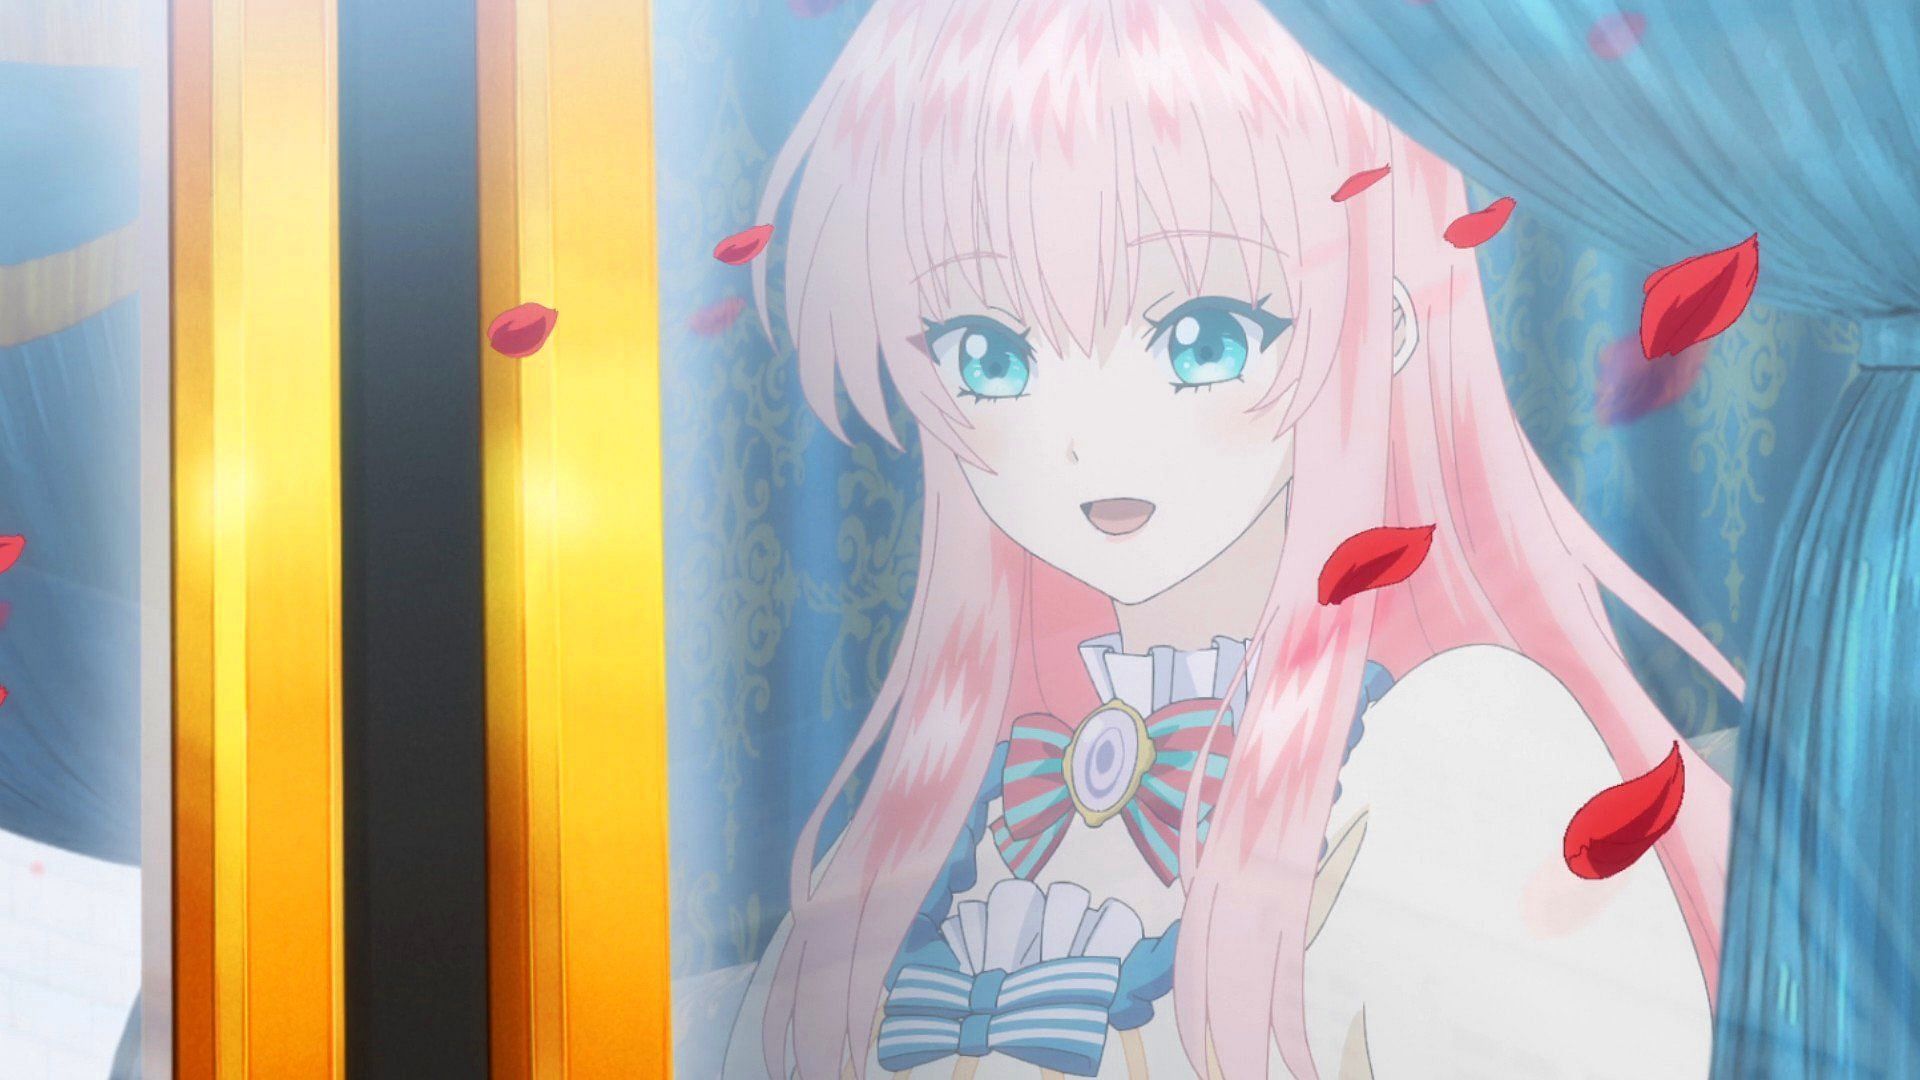 Rishe Weitzner, as seen in 7th Time Loop anime (Image via Studio KAI and Hornets)